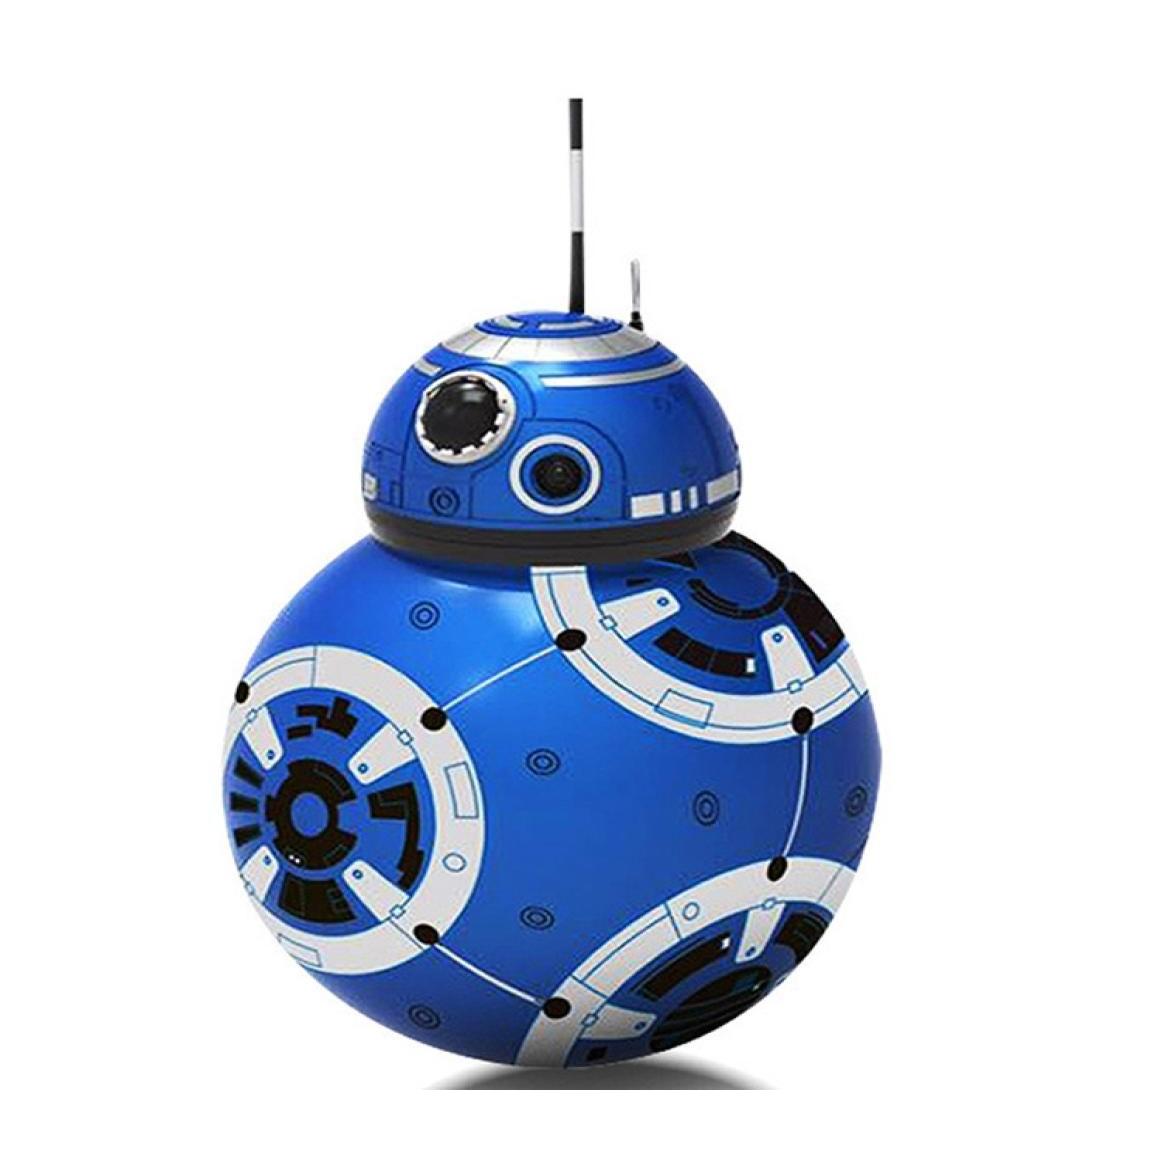 Animaux électriques / RC RC BB8 DROID ROBOT BALL Intelligent Action Kid Toy Gift with Sound 24g Remote Control8255567 Drop Delivery Toys Dhsql